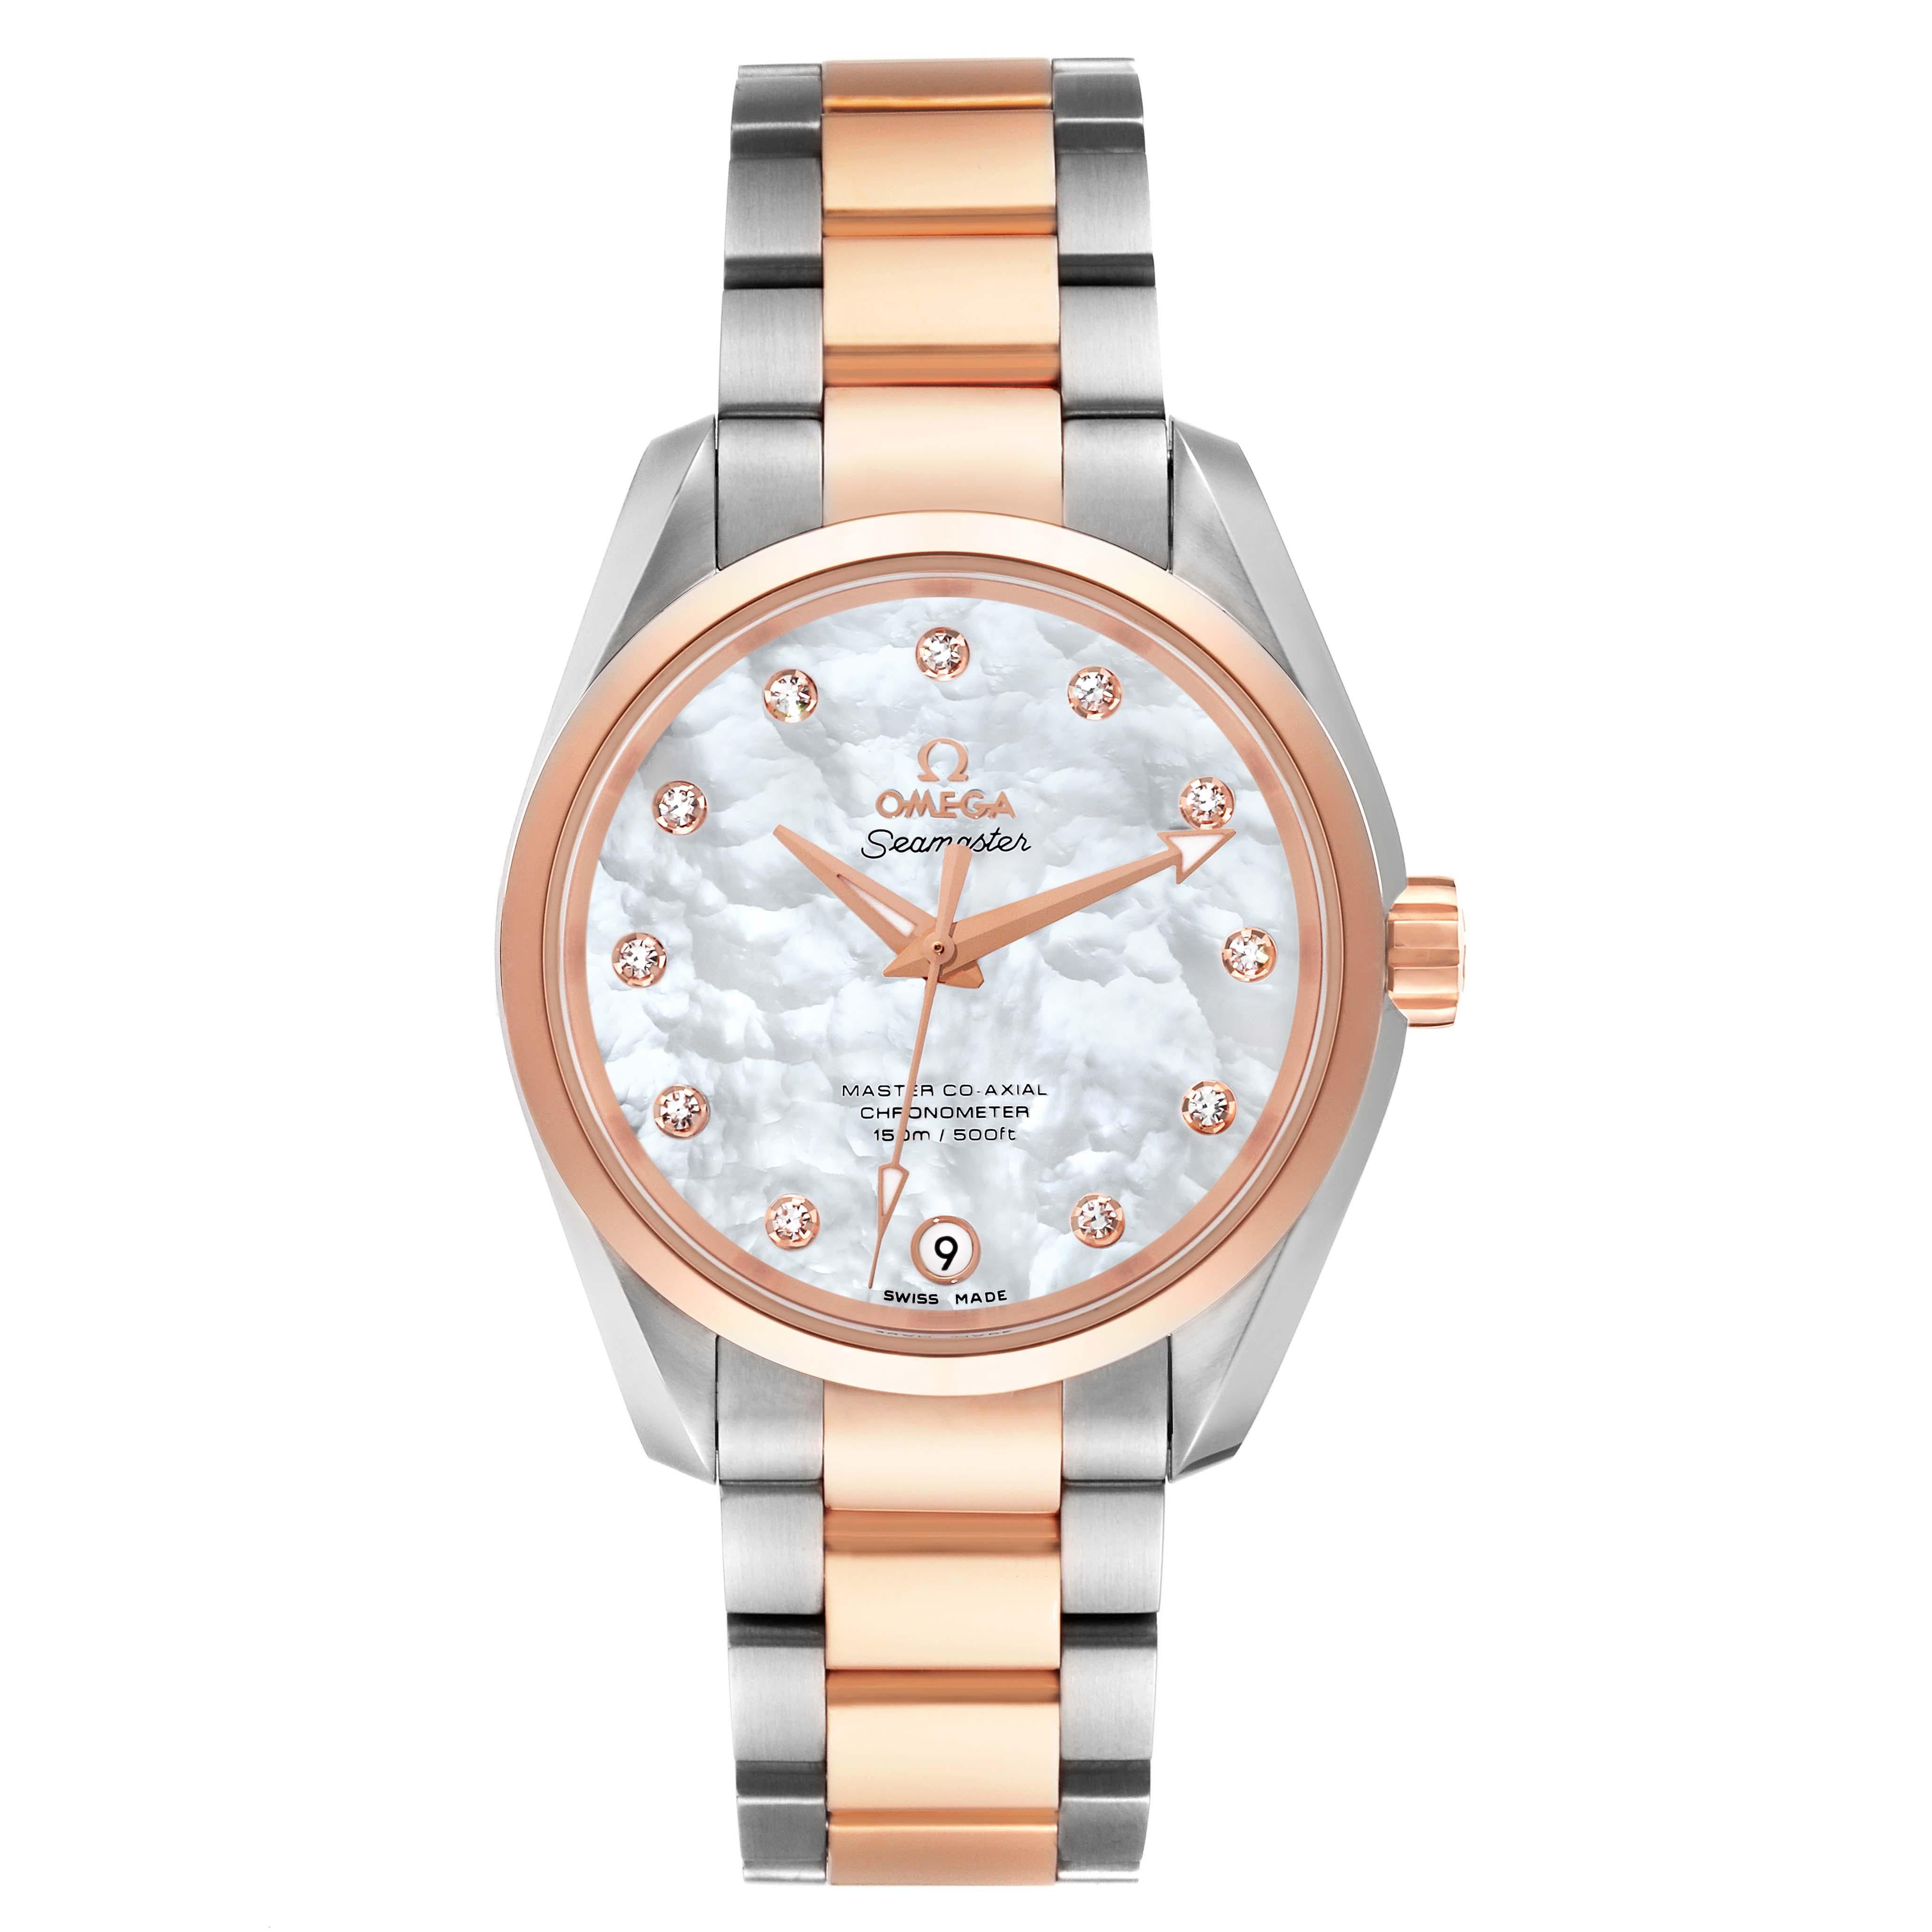 Omega Aqua Terra Rose Gold Mother of Pearl Diamond Ladies Watch 231.20.39.21.55.003 Unworn. Automatic self-winding movement with Co-Axial escapement. Free sprung-balance, 2 barrels mounted in series, automatic winding in both directions. Bridges and